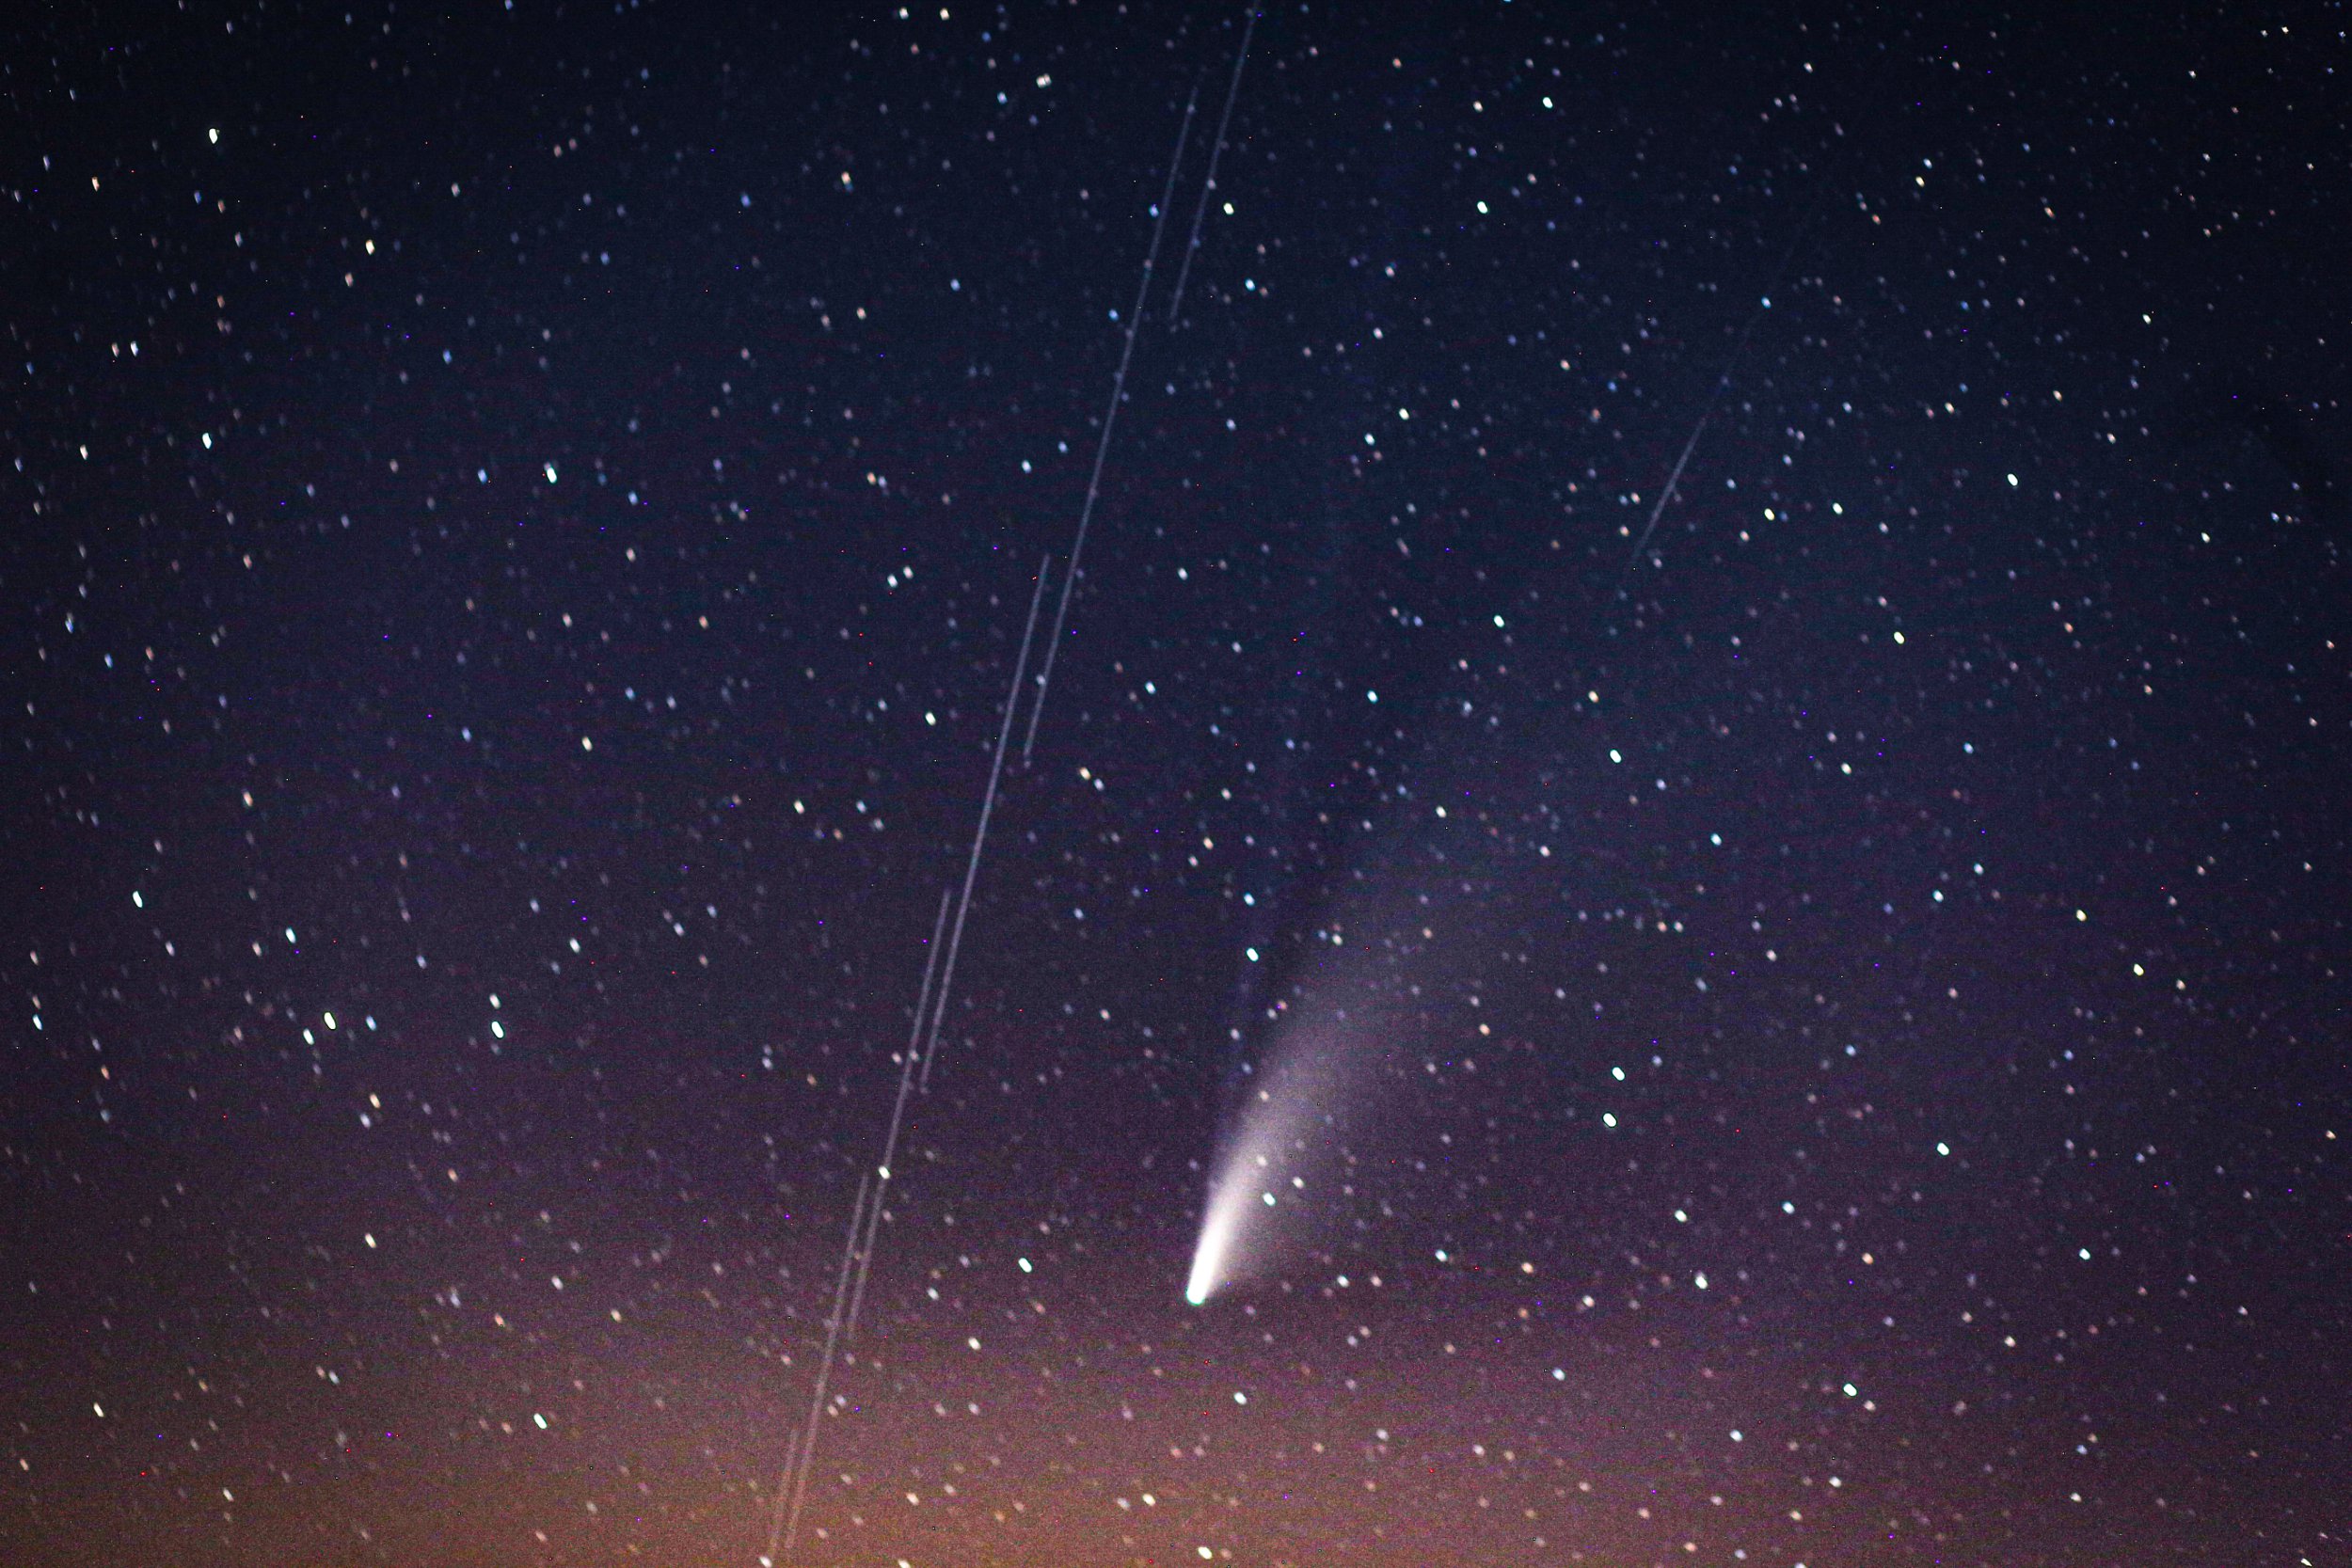 IDLIB, SYRIA - JULY 20: Comet Neowise, the "C / 2020 F3 Neowise comet" is observed over the sky in Idlib, Syria on July 20, 2020. The "C / 2020 F3 Neowise comet", named after the "NEOWISE" recently discovered comet by telescope of the US Aviation and Space Agency. (Photo by Muhammed Said/Anadolu Agency via Getty Images)